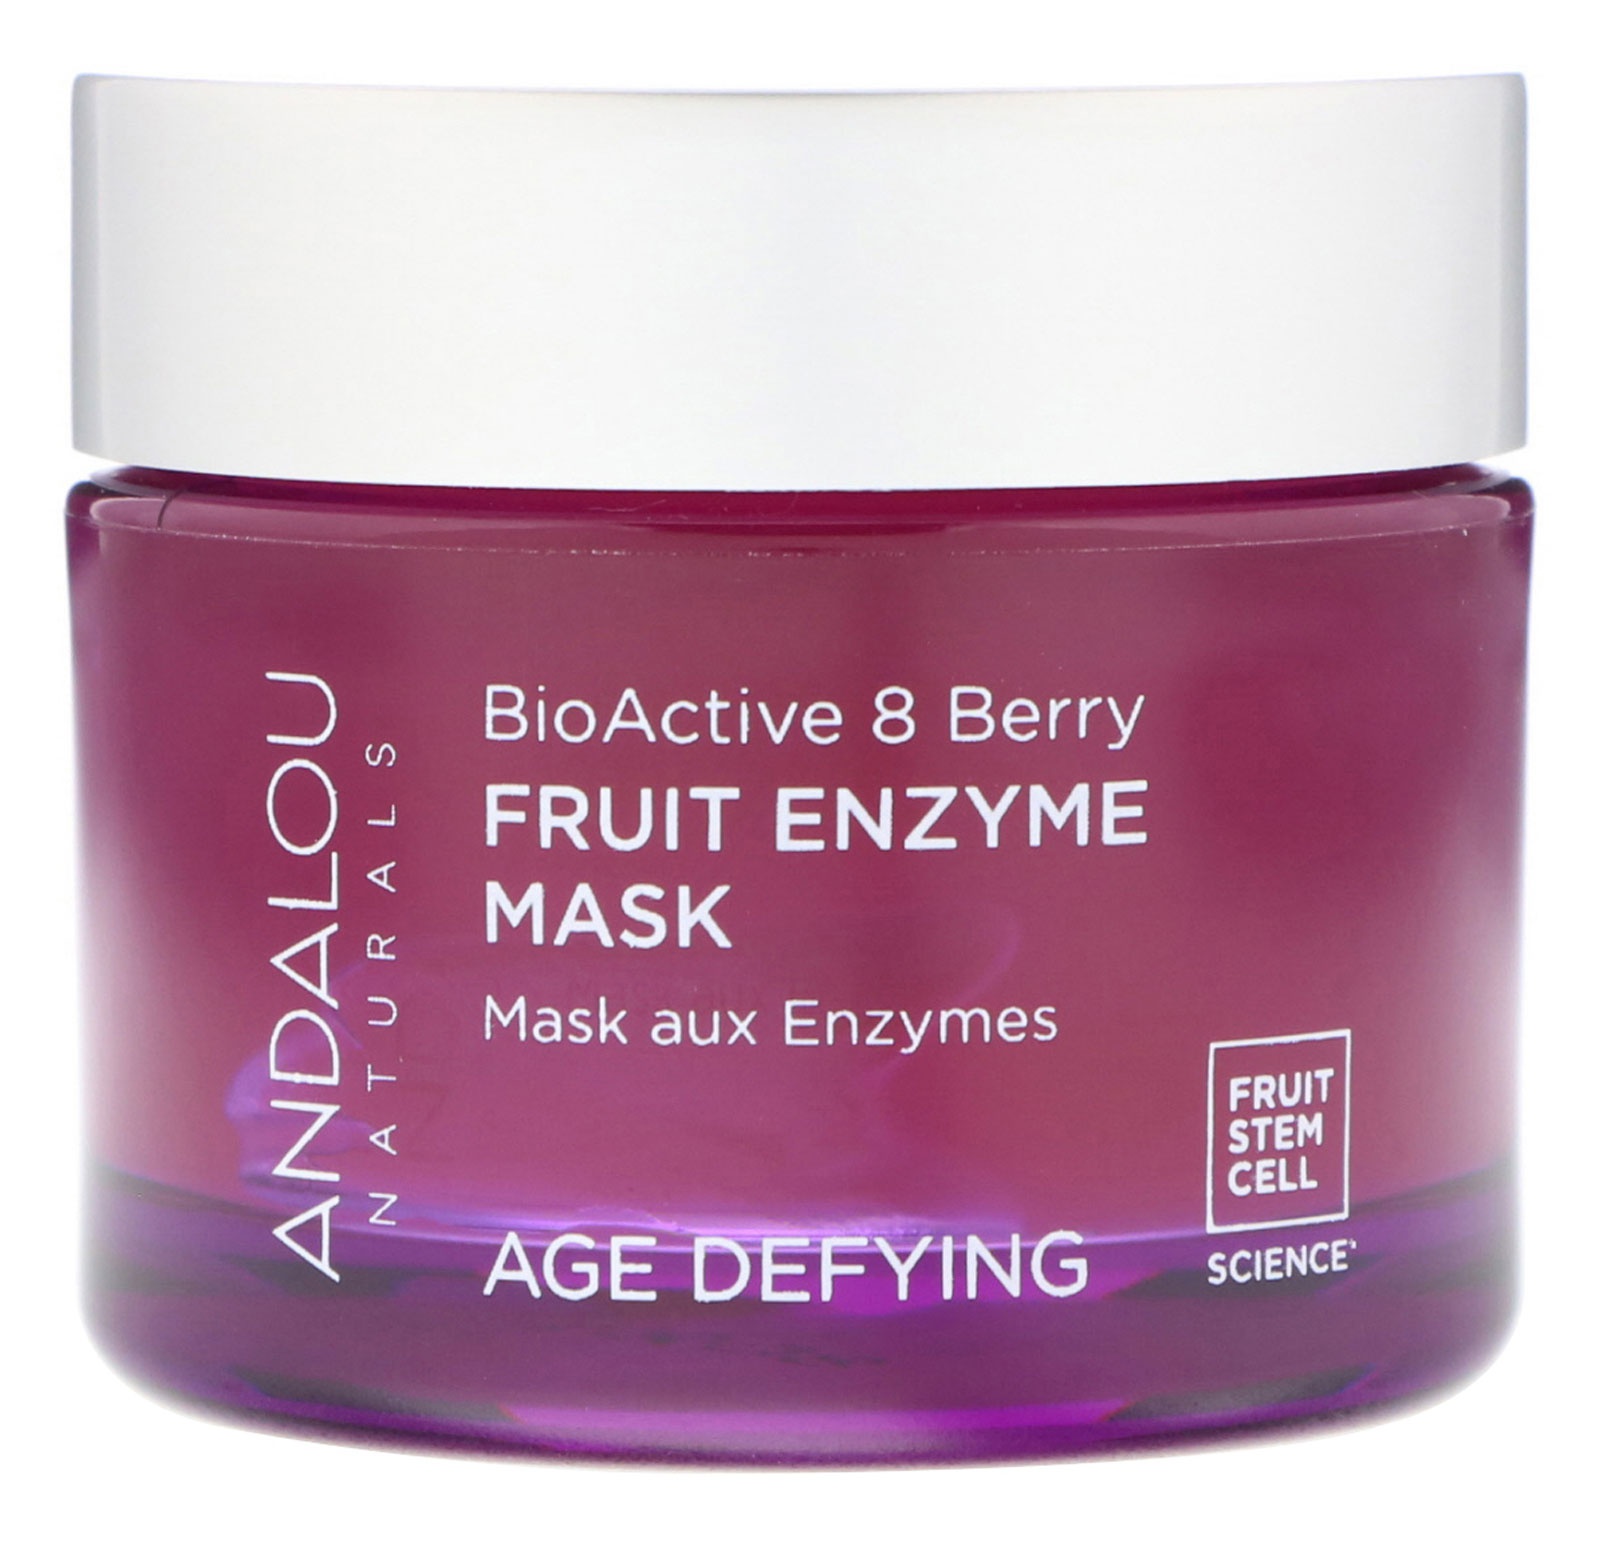 Andalou Naturals Fruit Enzyme Mask, Bioactive 8 Berry, Age Defying